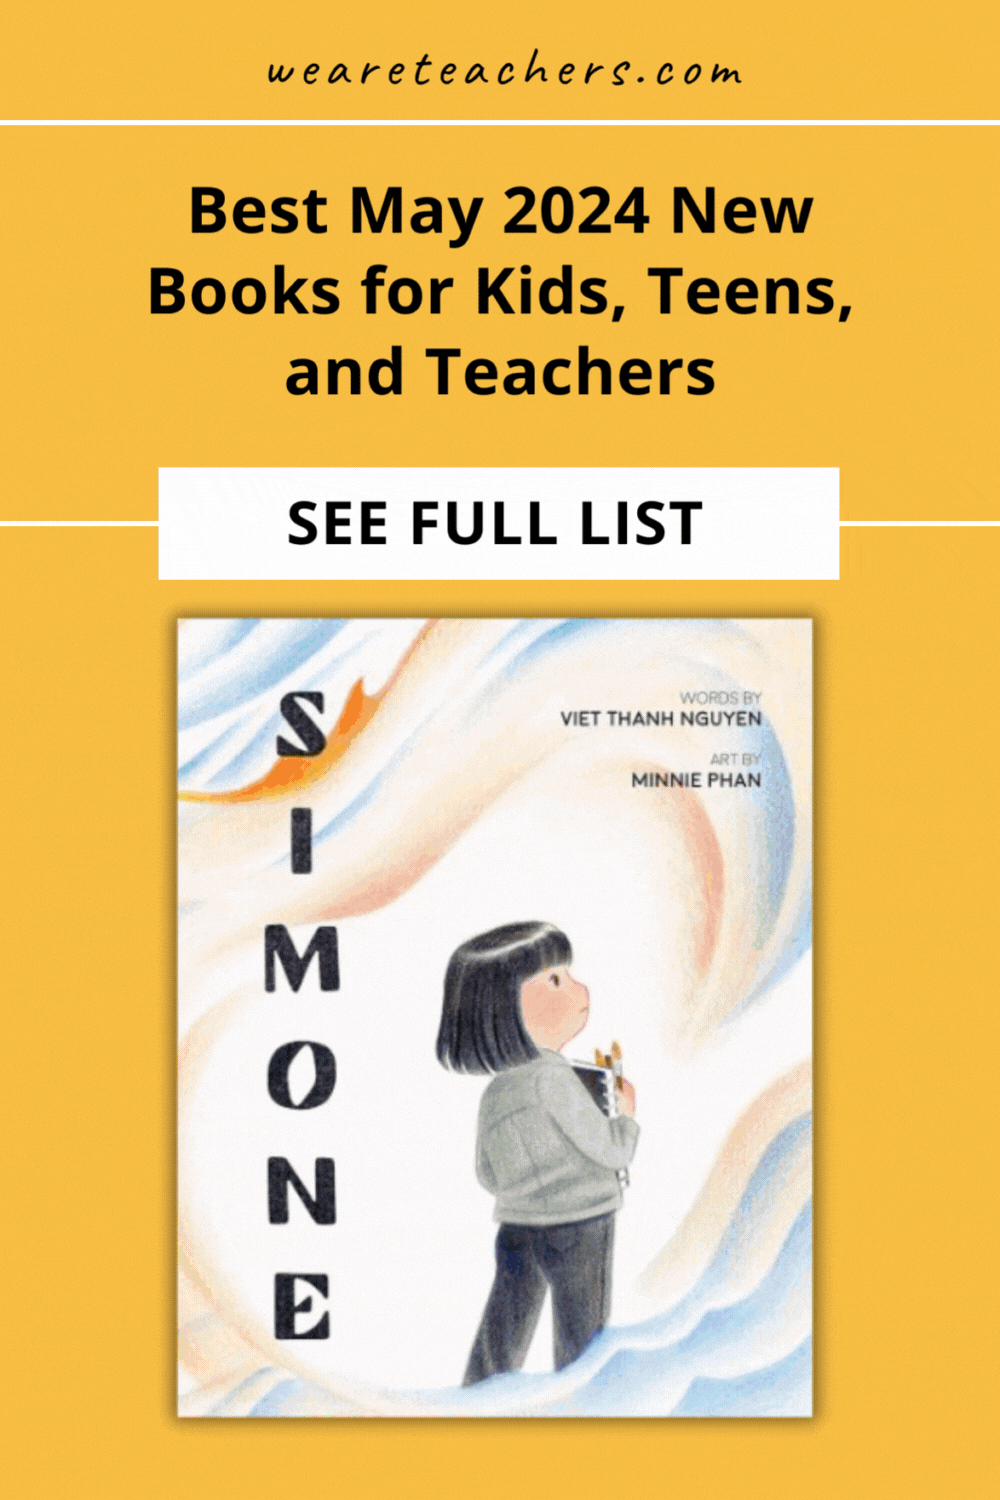 Find all the best May 2024 new book releases, including picture books, middle grade and young adult fiction, nonfiction, and more.